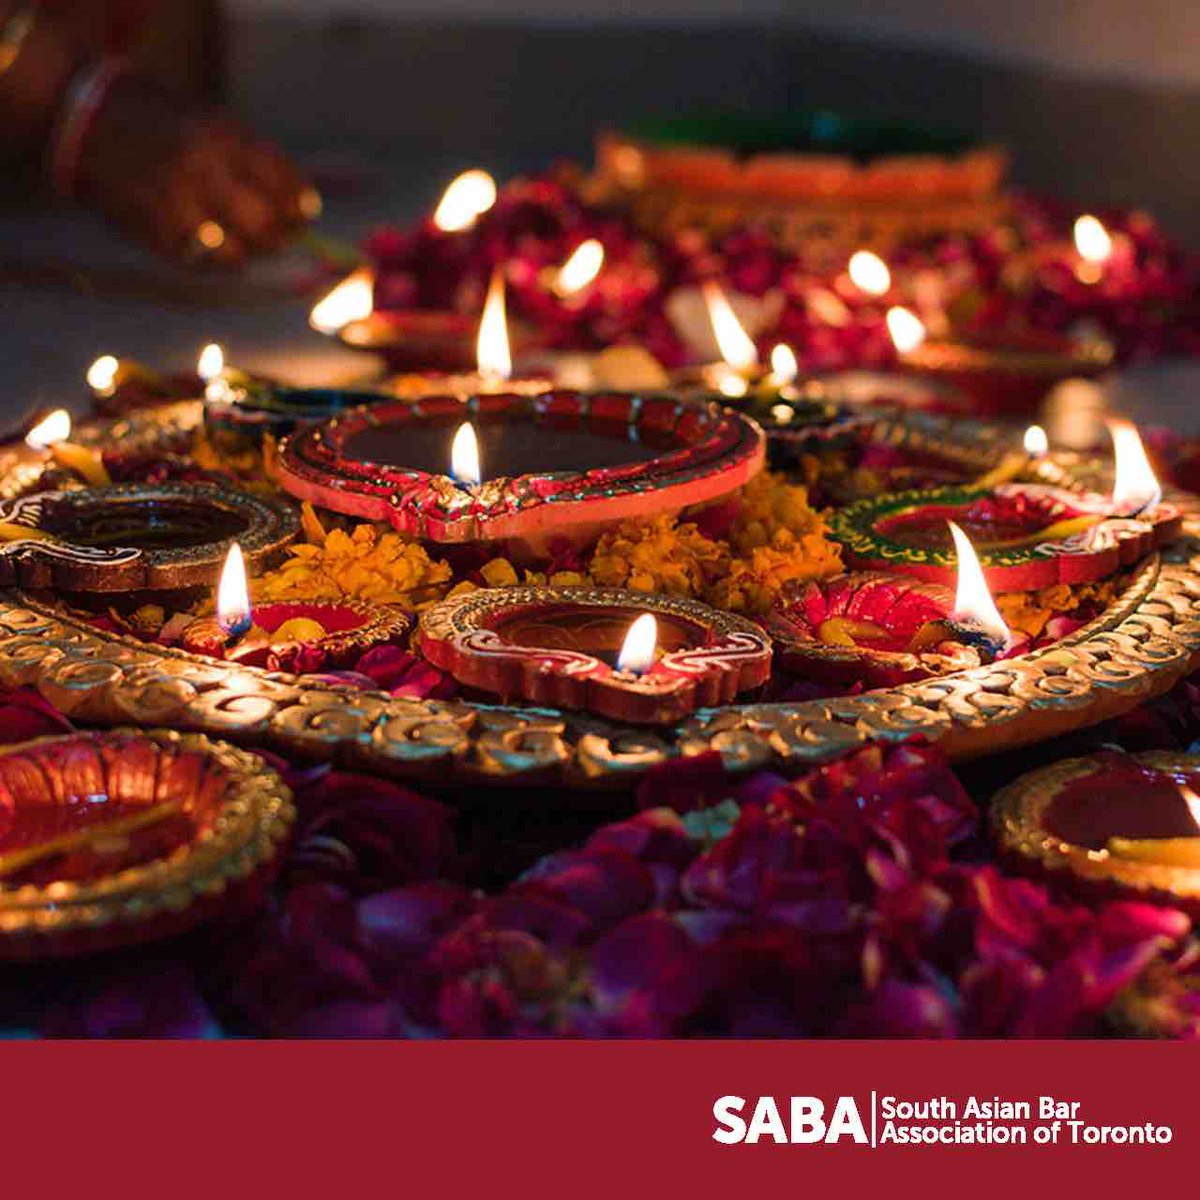 Our members are reminded of our Diwali and Bandi Chhor Divas celebration in partnership with the OBA. Our members may attend for free – check our recent newsletters for a discount code and please email us if you have trouble registering. Info/Register: ow.ly/Bn0x50Q6wVx.